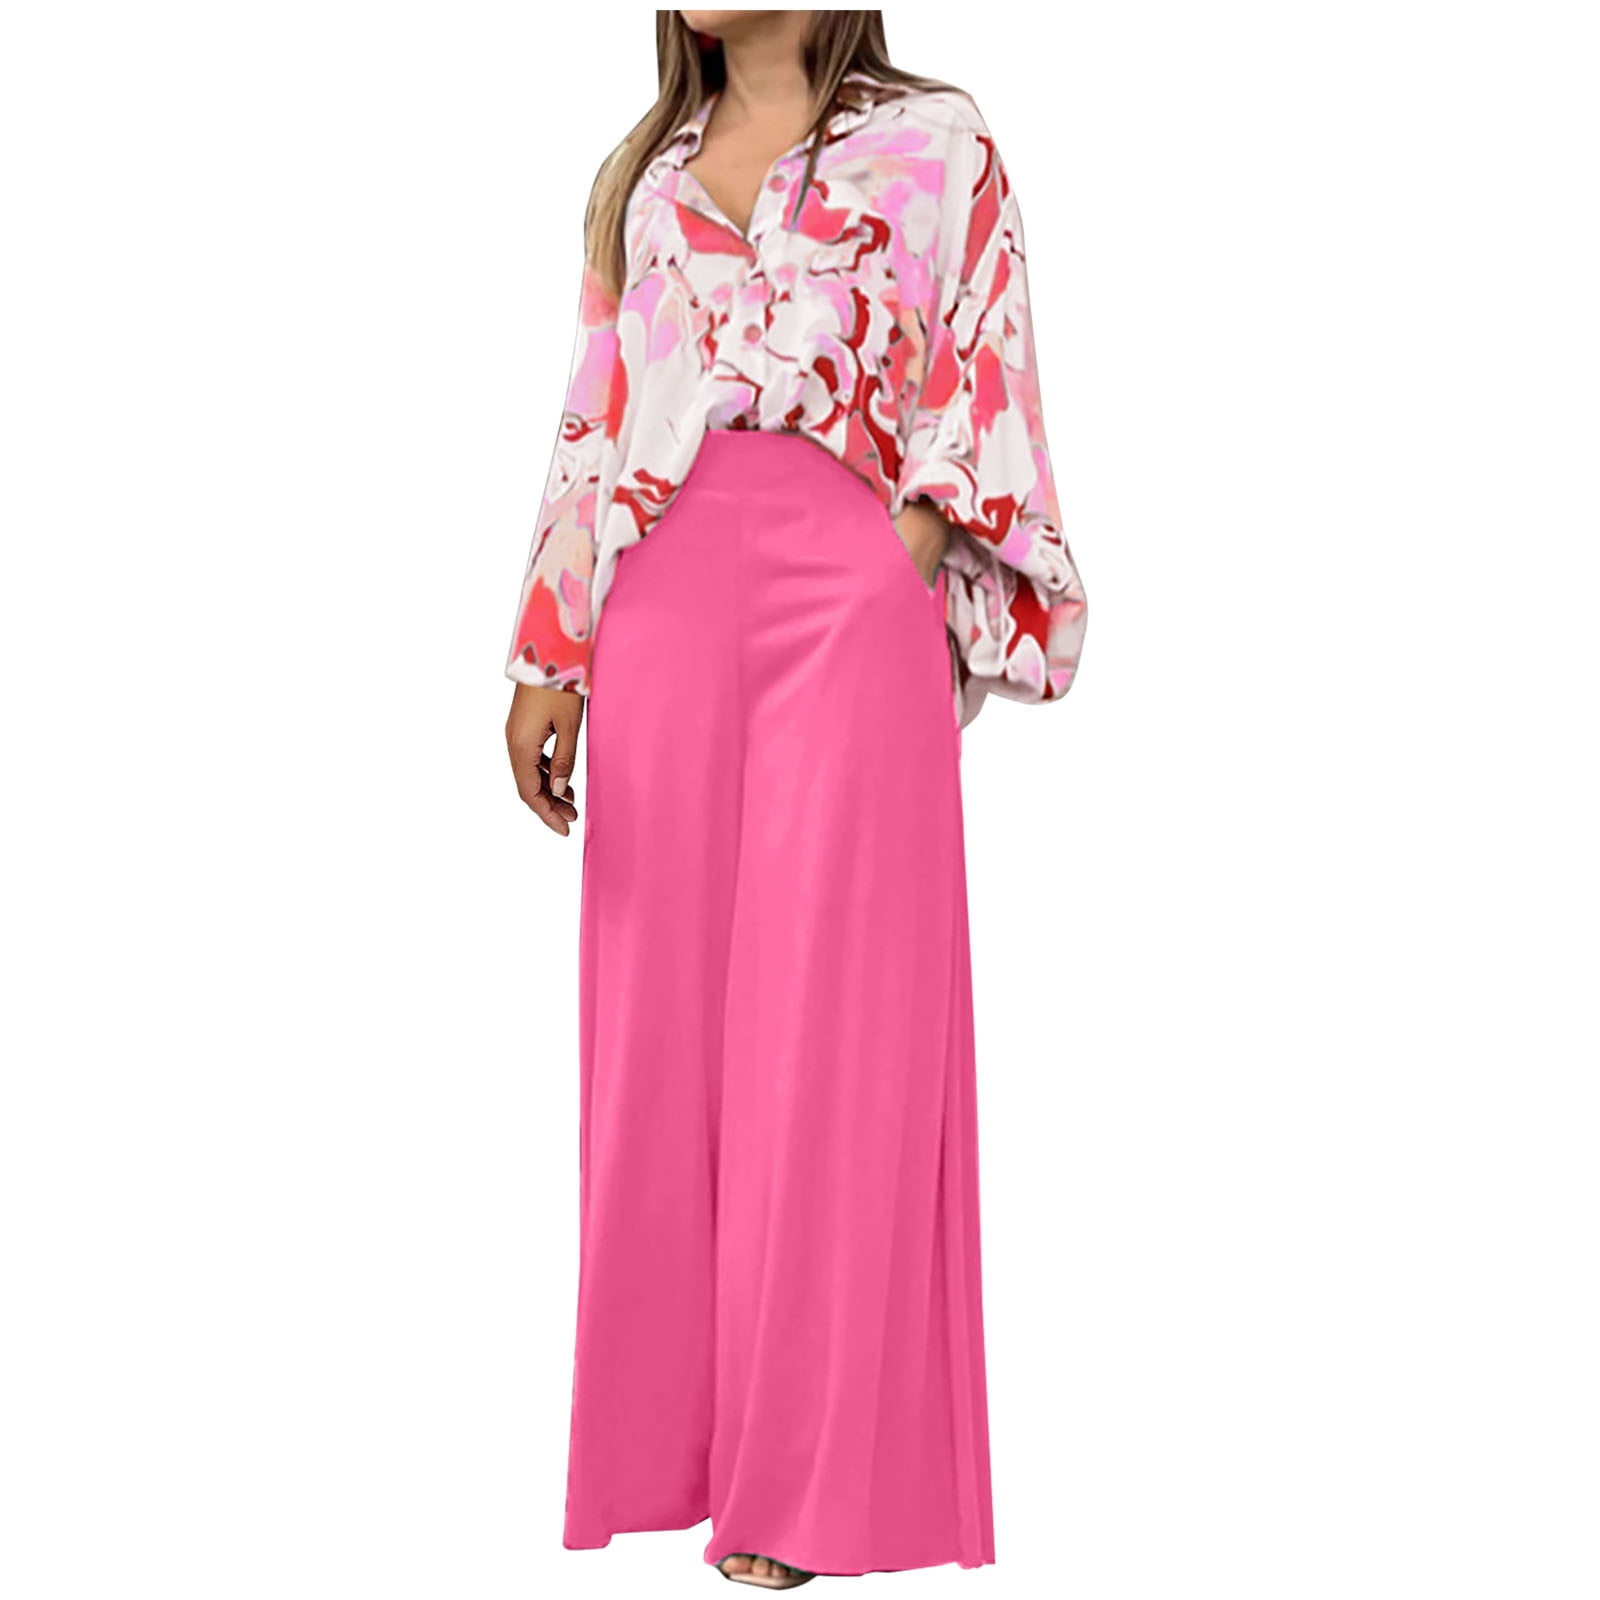 YYDGH Women Casual Two Piece Floral Outfits Oversized Button Down Shirt  Blouse and Long Wide Leg Palazzo Pants Set Jumpsuit Pink XXXL